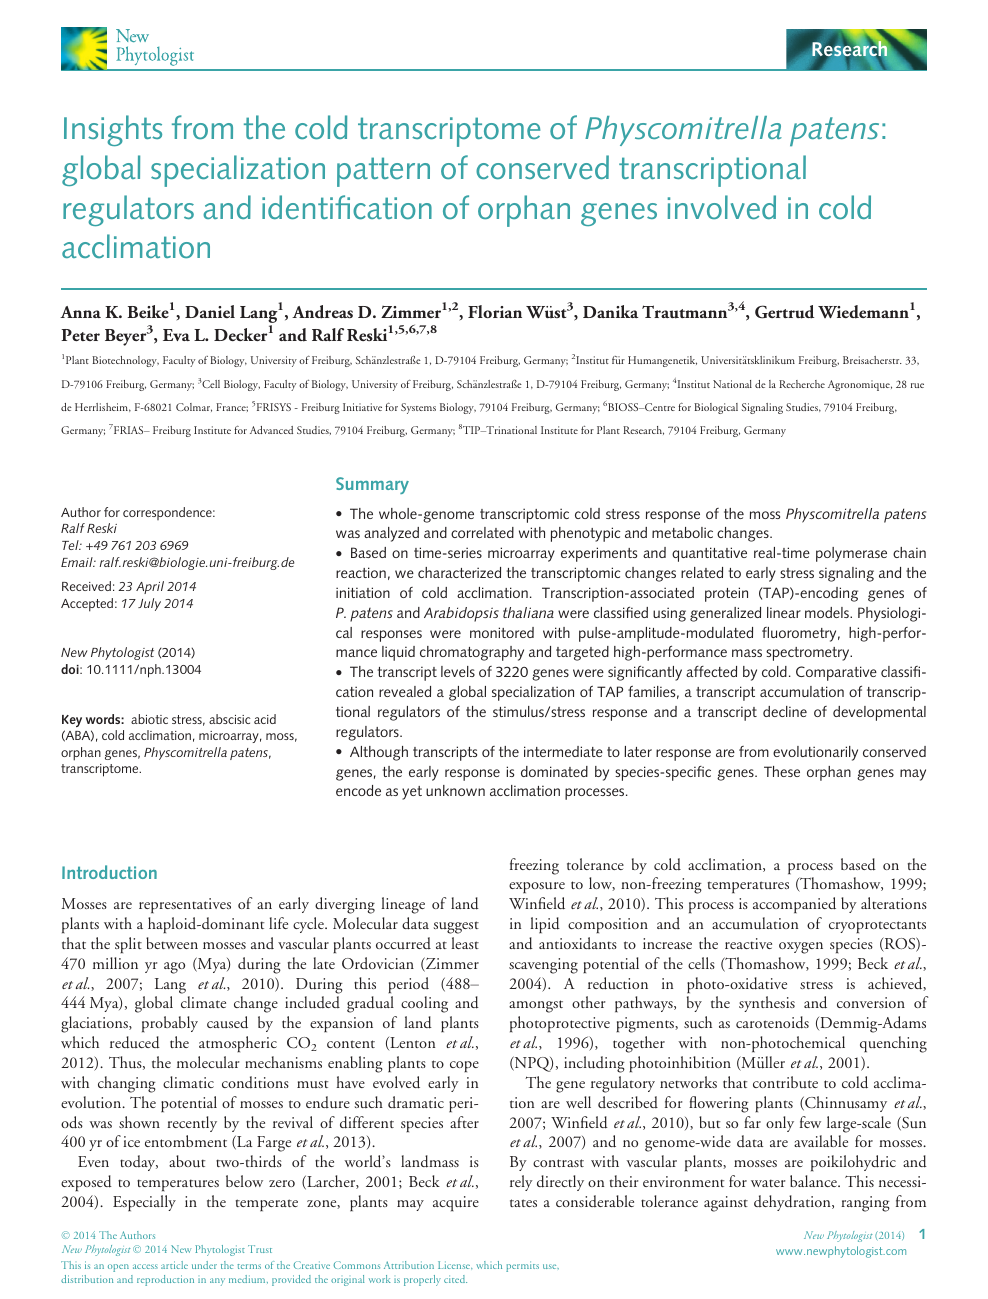 Insights From The Cold Transcriptome Of Physcomitrella - 